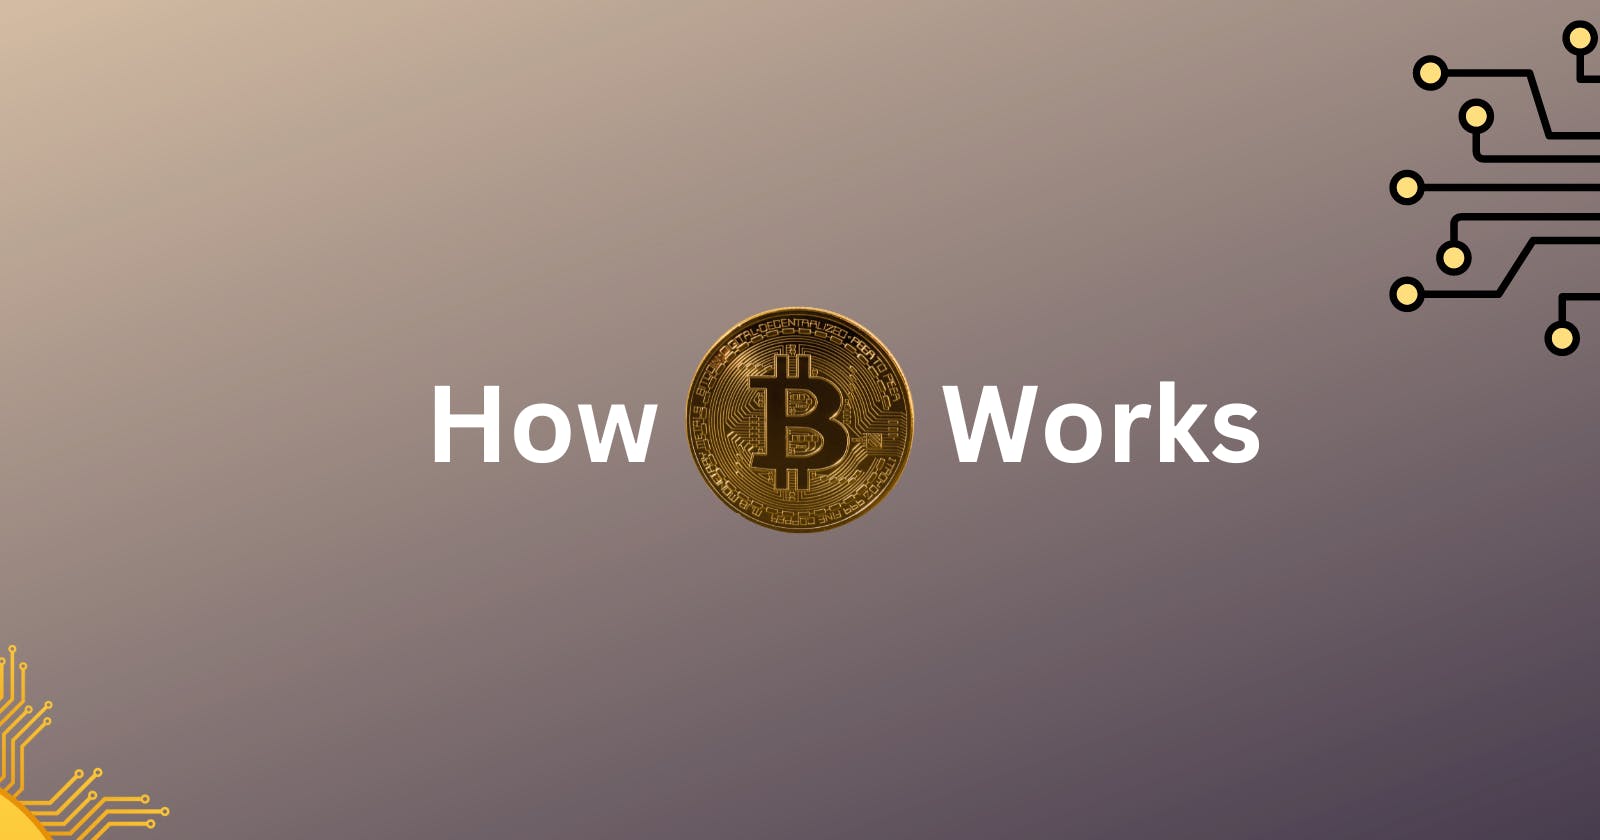 How does Bitcoin work?